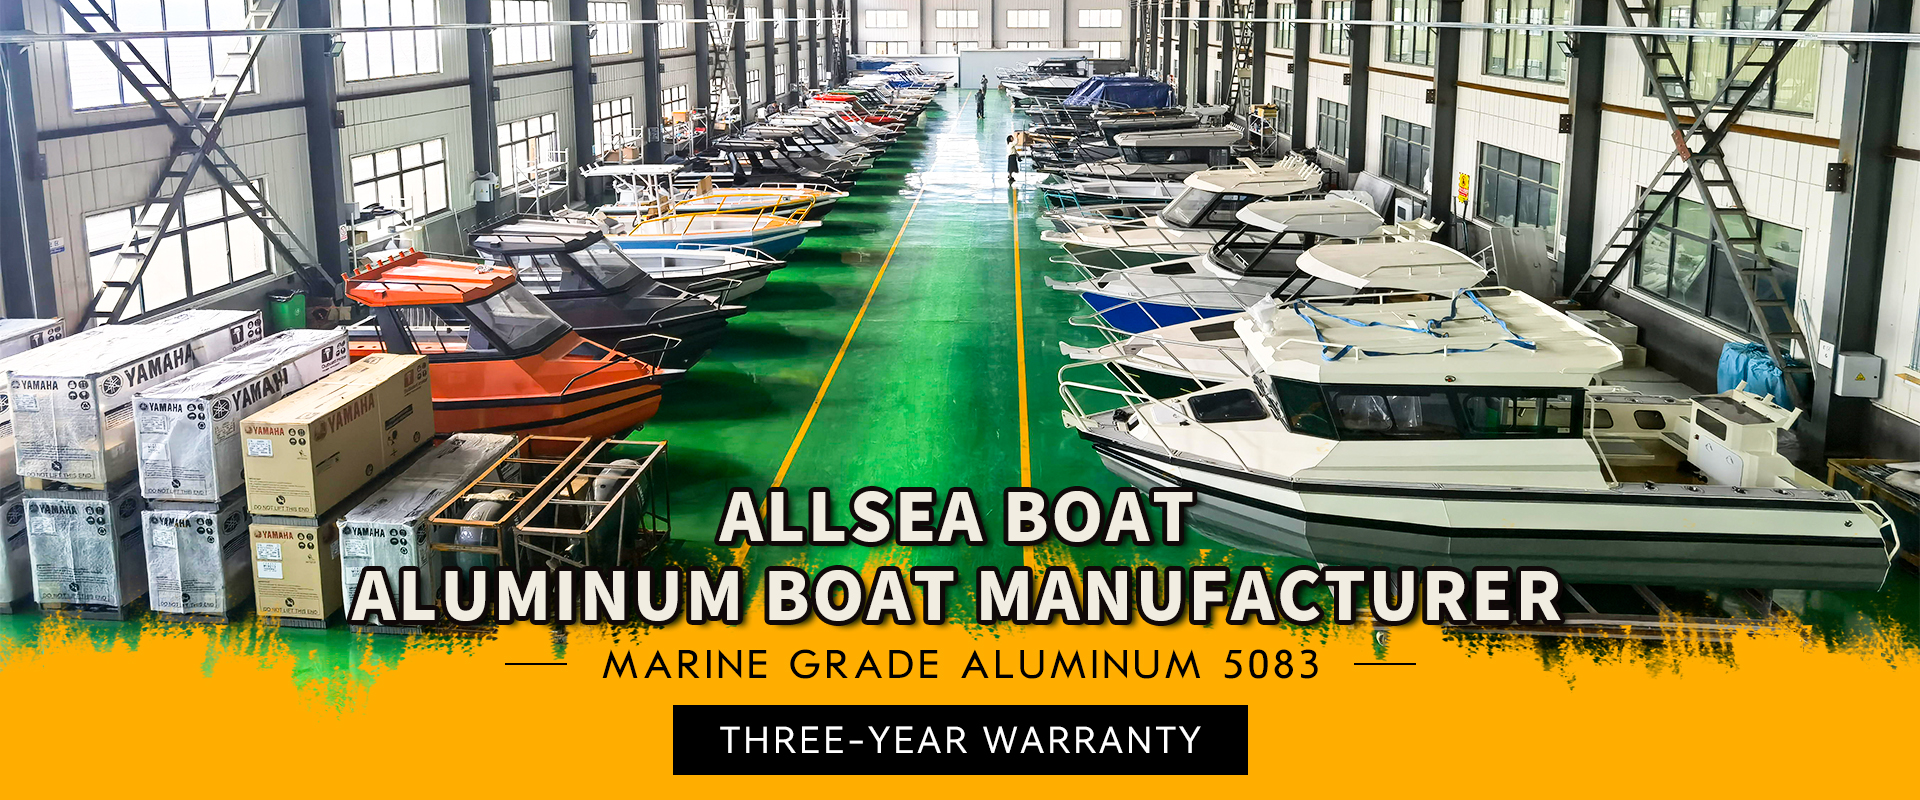 Gospel Boat 9m Extra Large Cuddy Cabin Luxury Yacht Aluminum Fishing Boat  with CE Certificate for Sale - China Aluminium Boat and Fishing Vessel  price